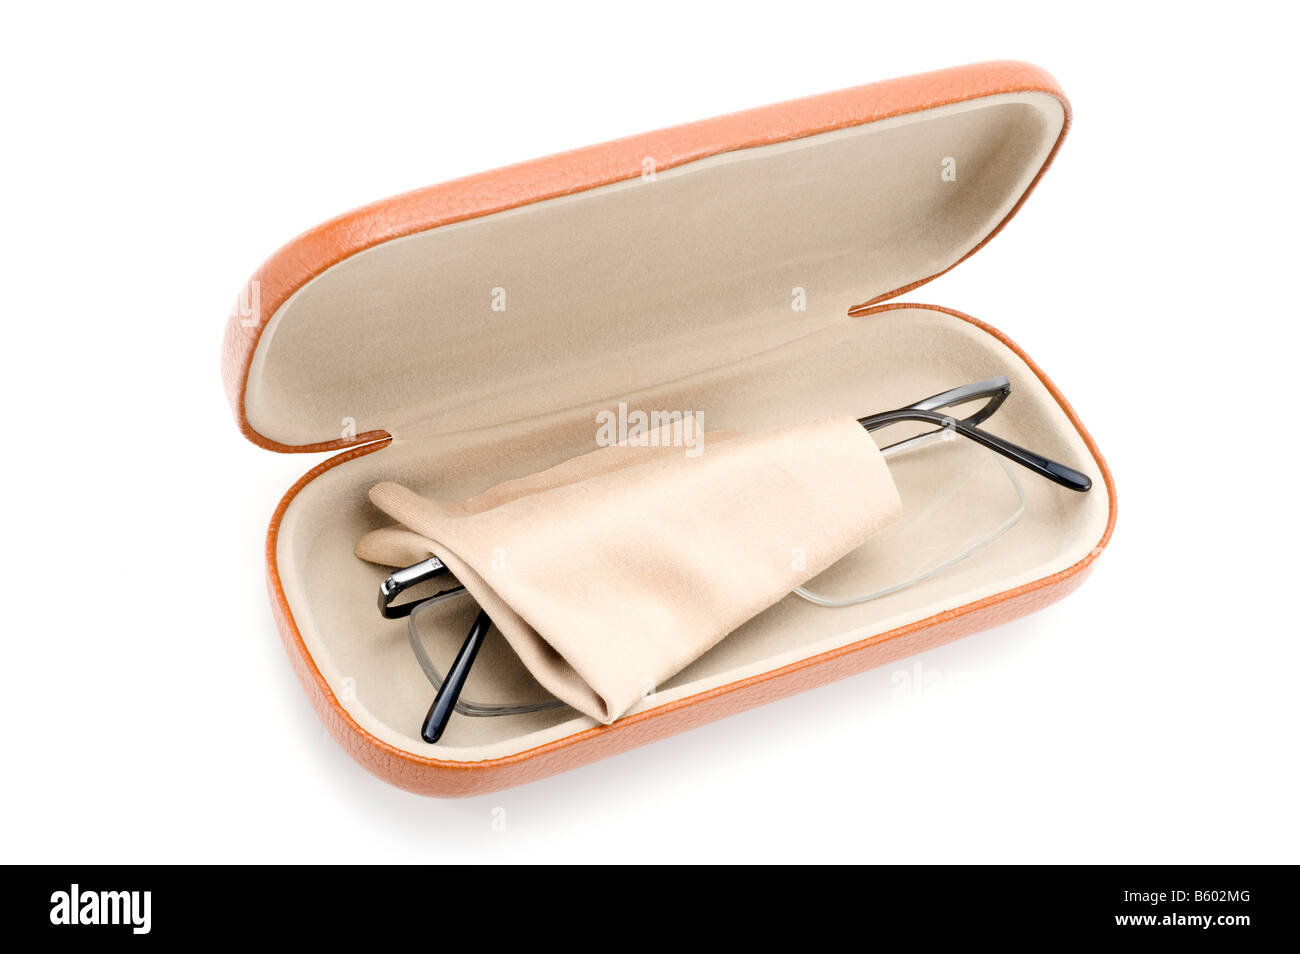 Pair of man's spectacles in a leather lined case with lens cleaning cloth Stock Photo